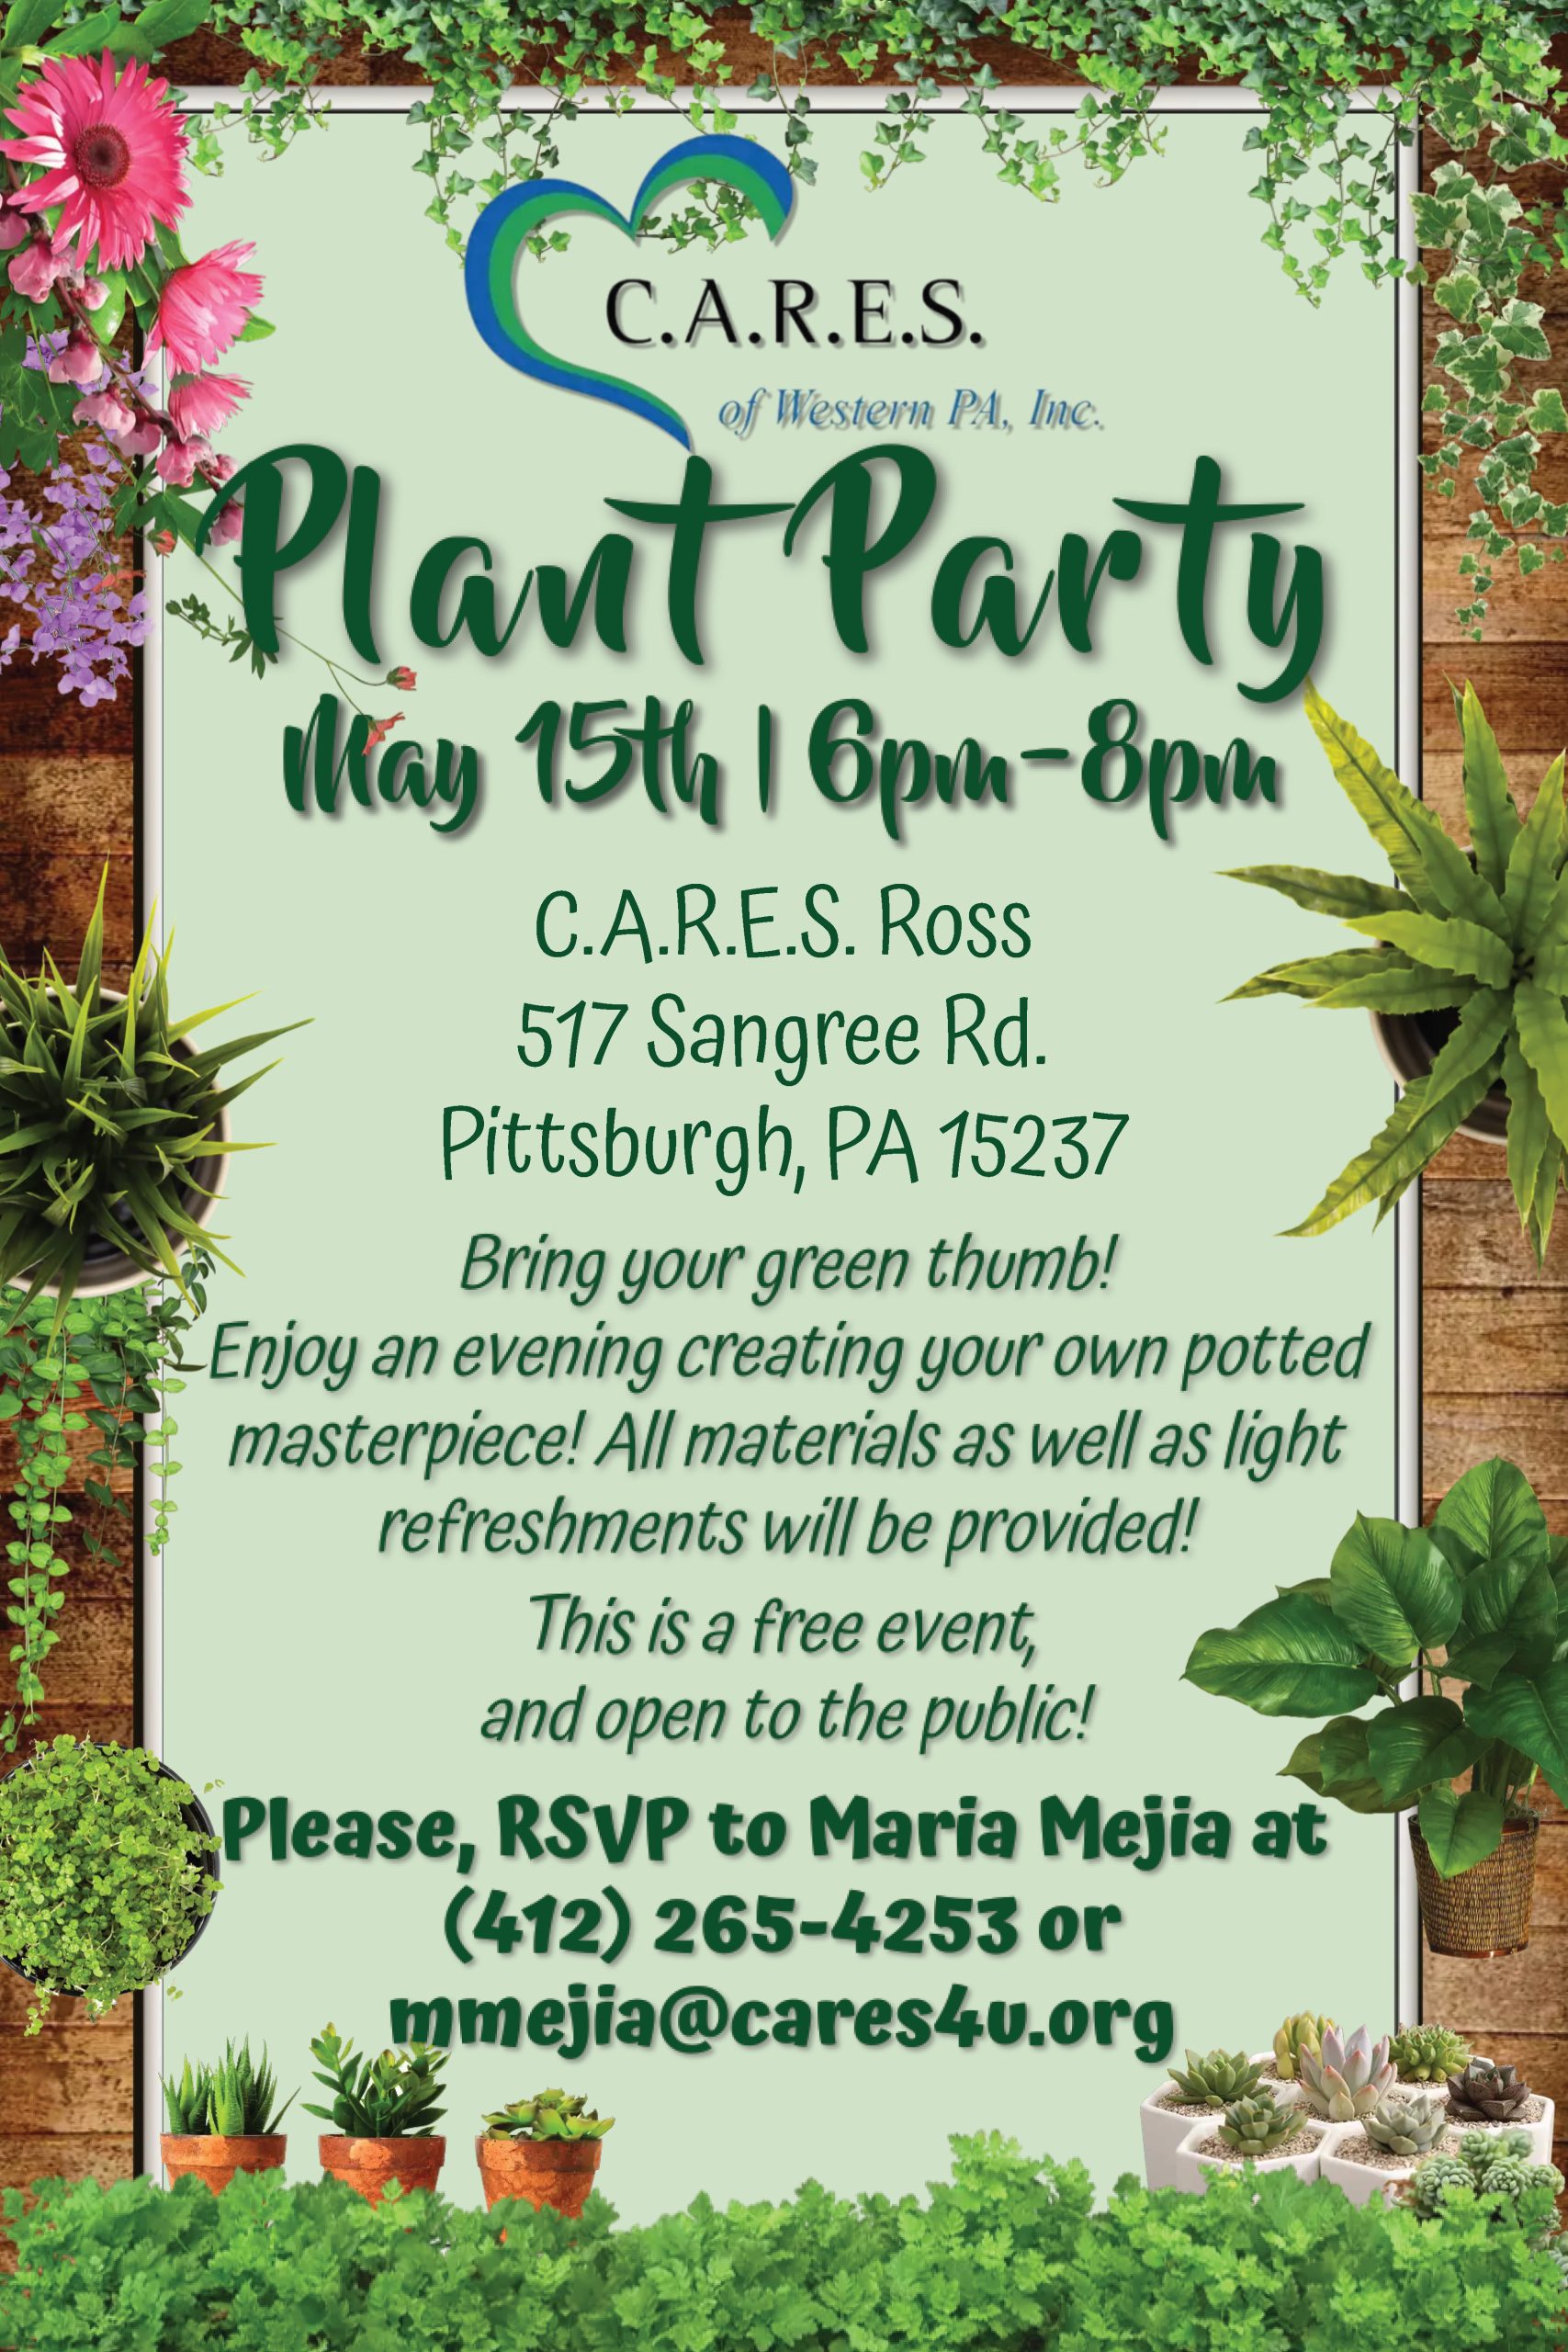 C.A.R.E.S. Plant Party - Pittsburgh 6